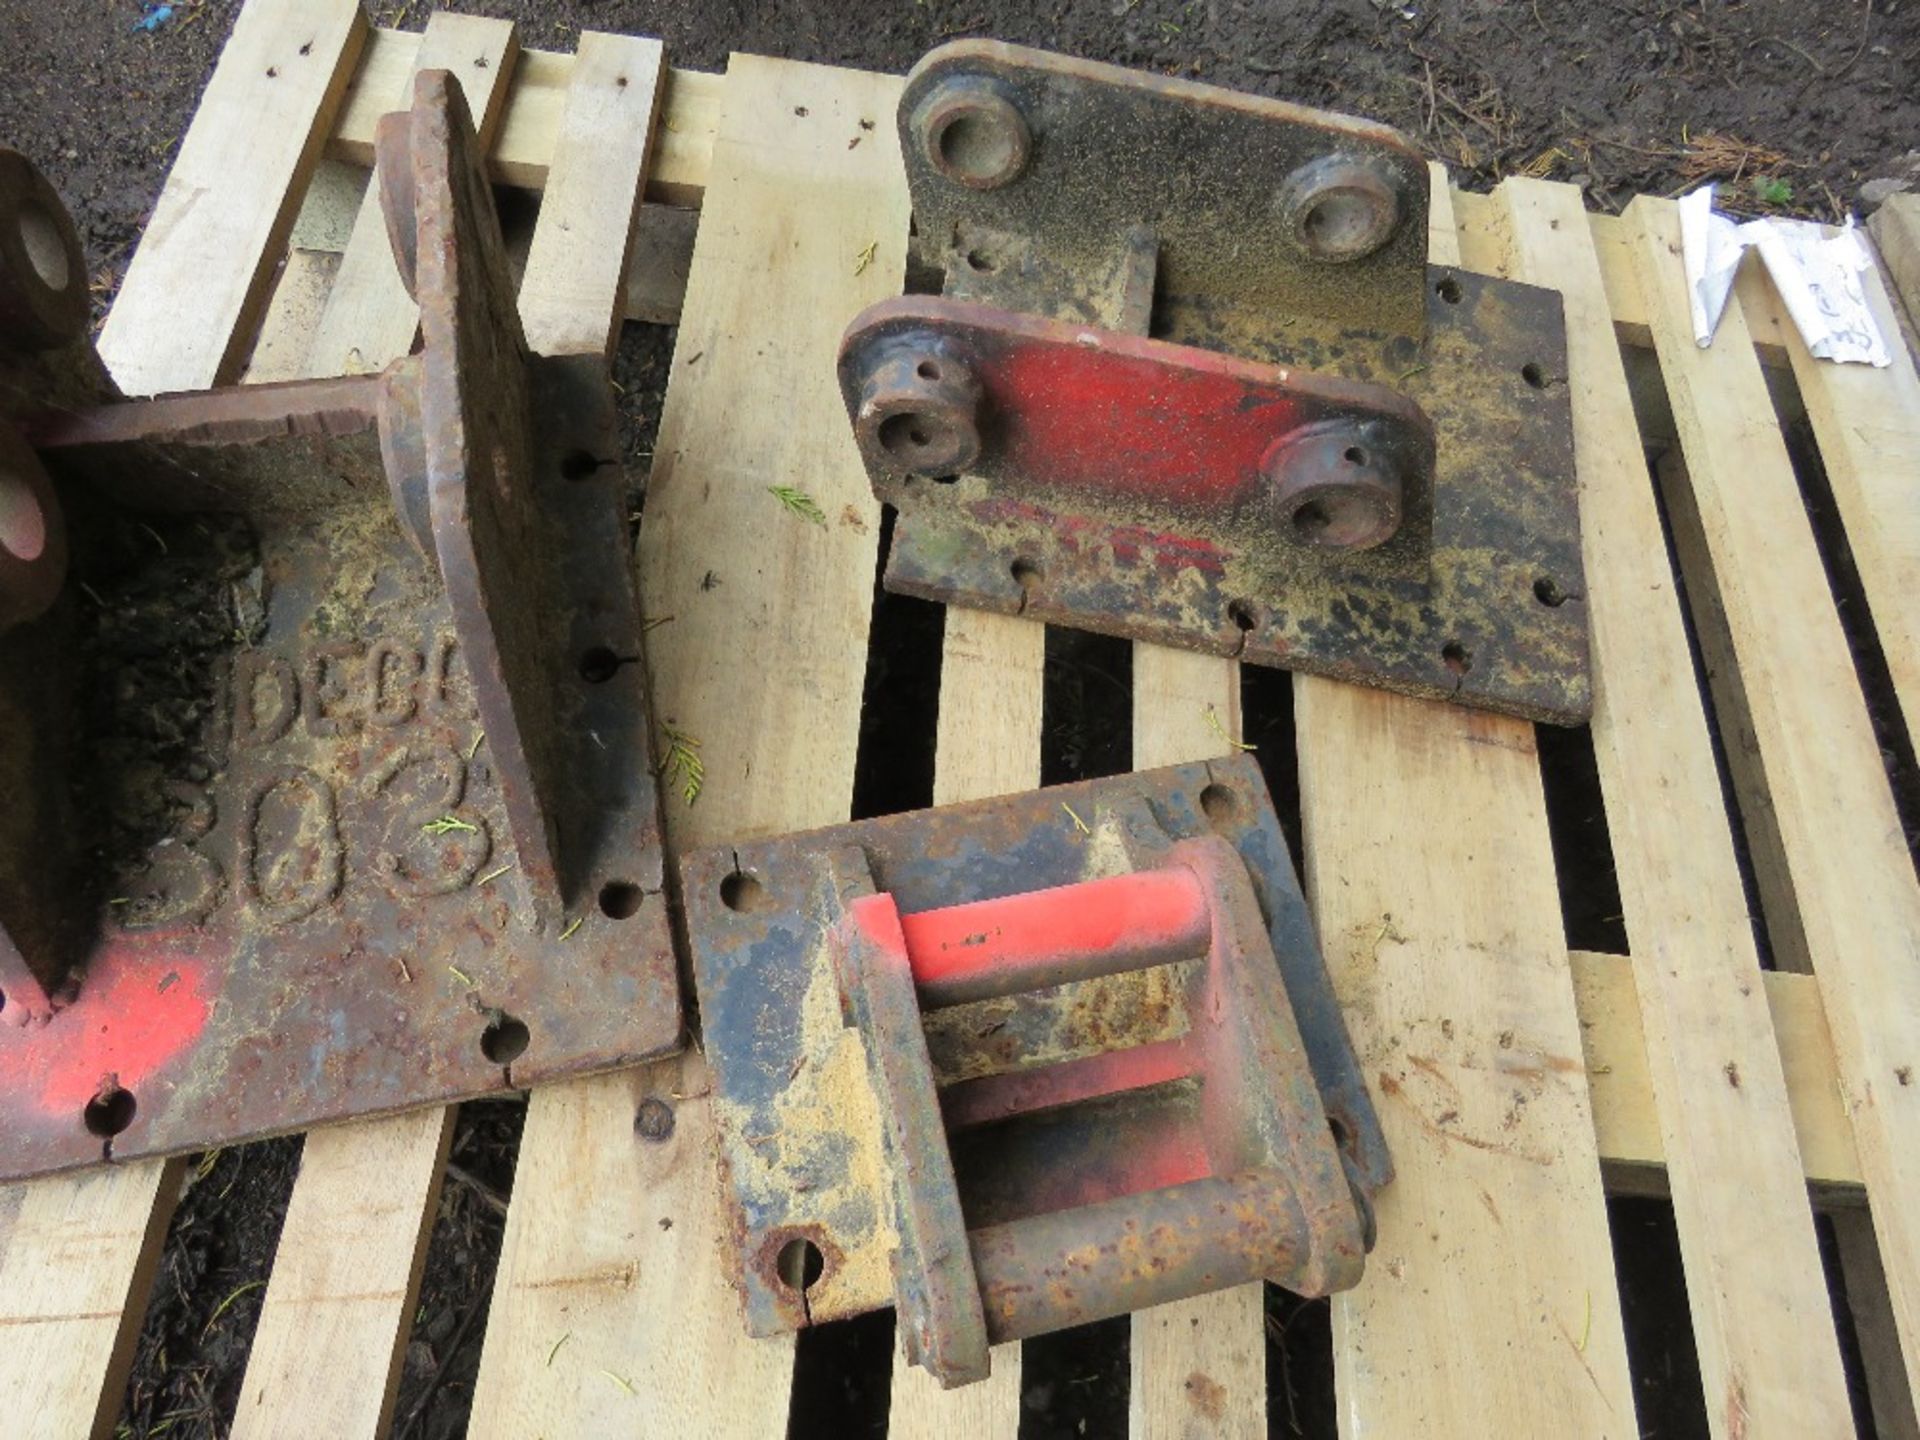 5 X EXCAVATOR BREAKER MOUNTING PLATES / HEADSTOCKS. SOURCED FROM MAJOR UK ROADS CONTRACTOR. - Image 3 of 3